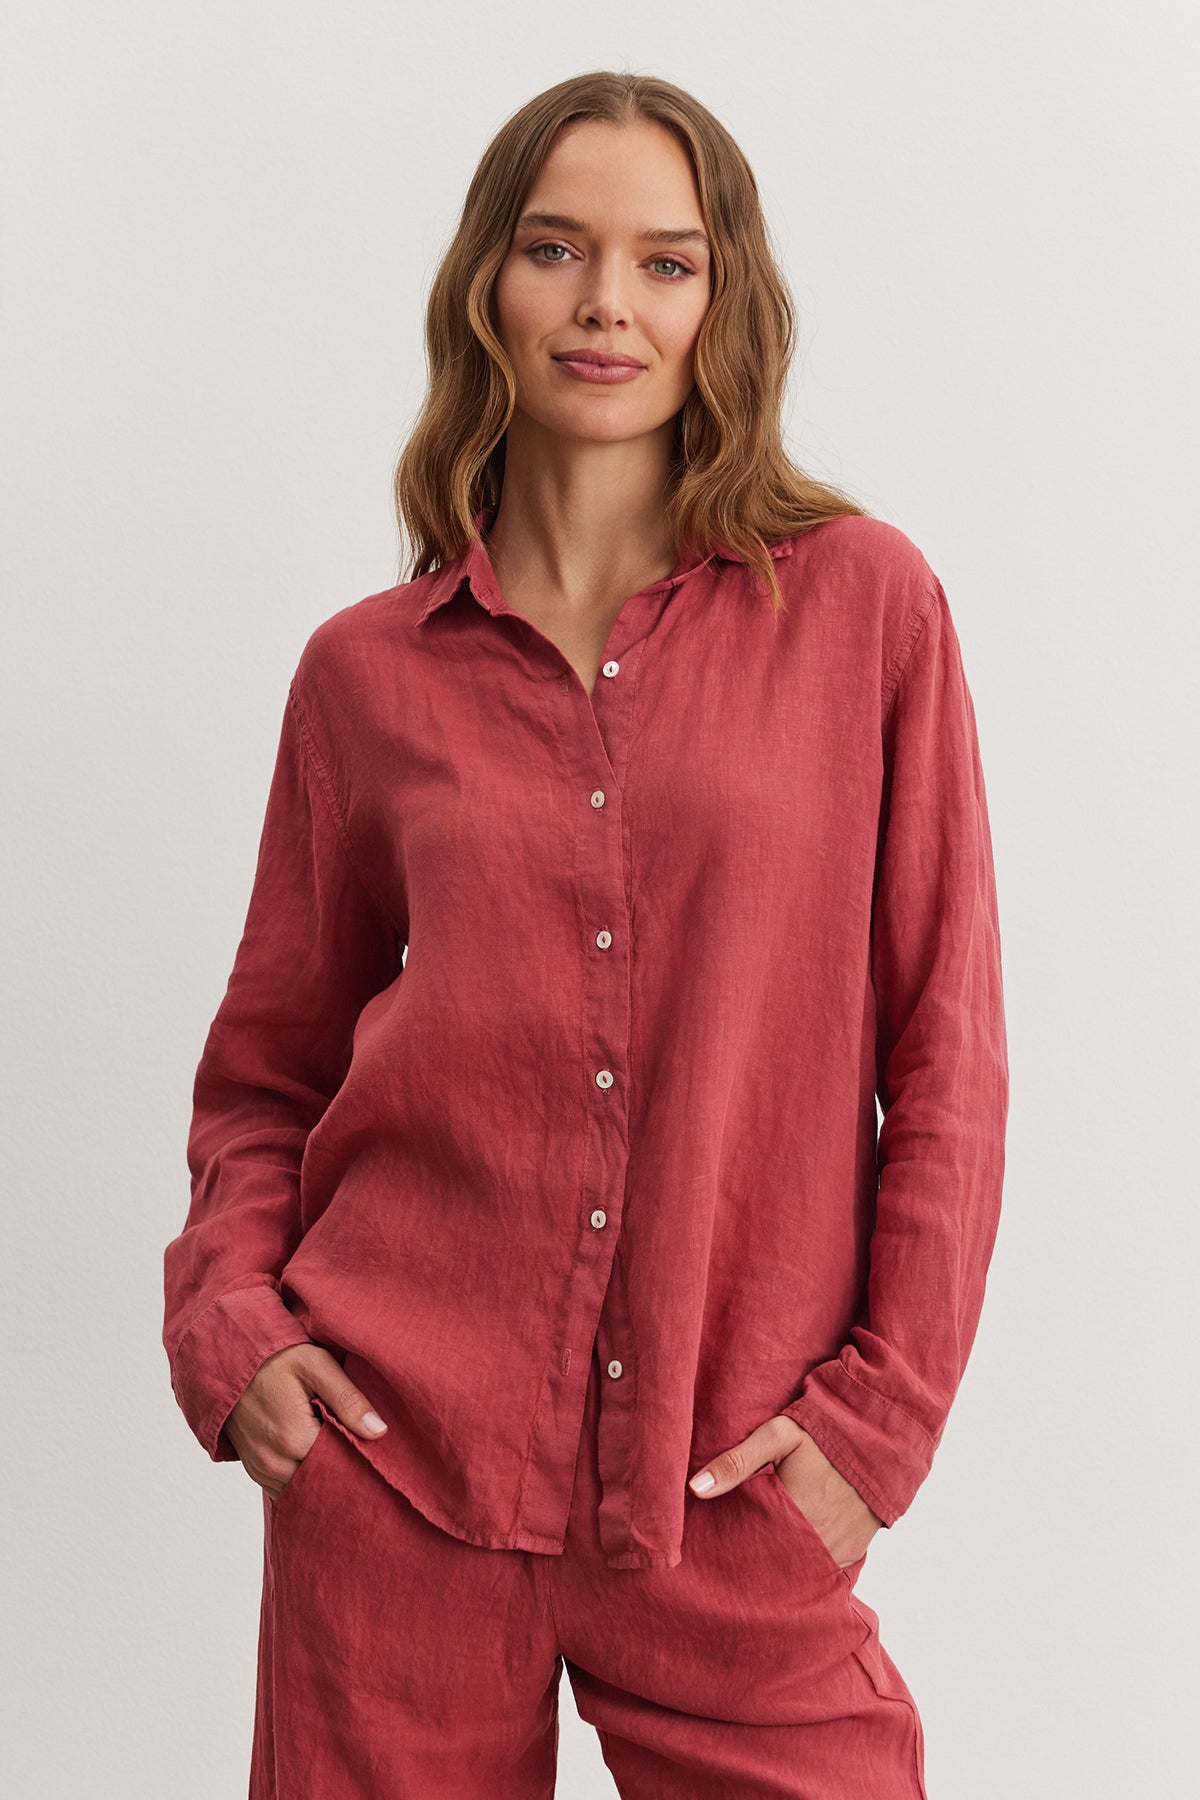 Woman in a casual red Willow Linen Button-Up shirt and matching pants, standing against a neutral background, looking directly at the camera with a slight smile. (Brand: Velvet by Graham & Spencer)-36909598277825